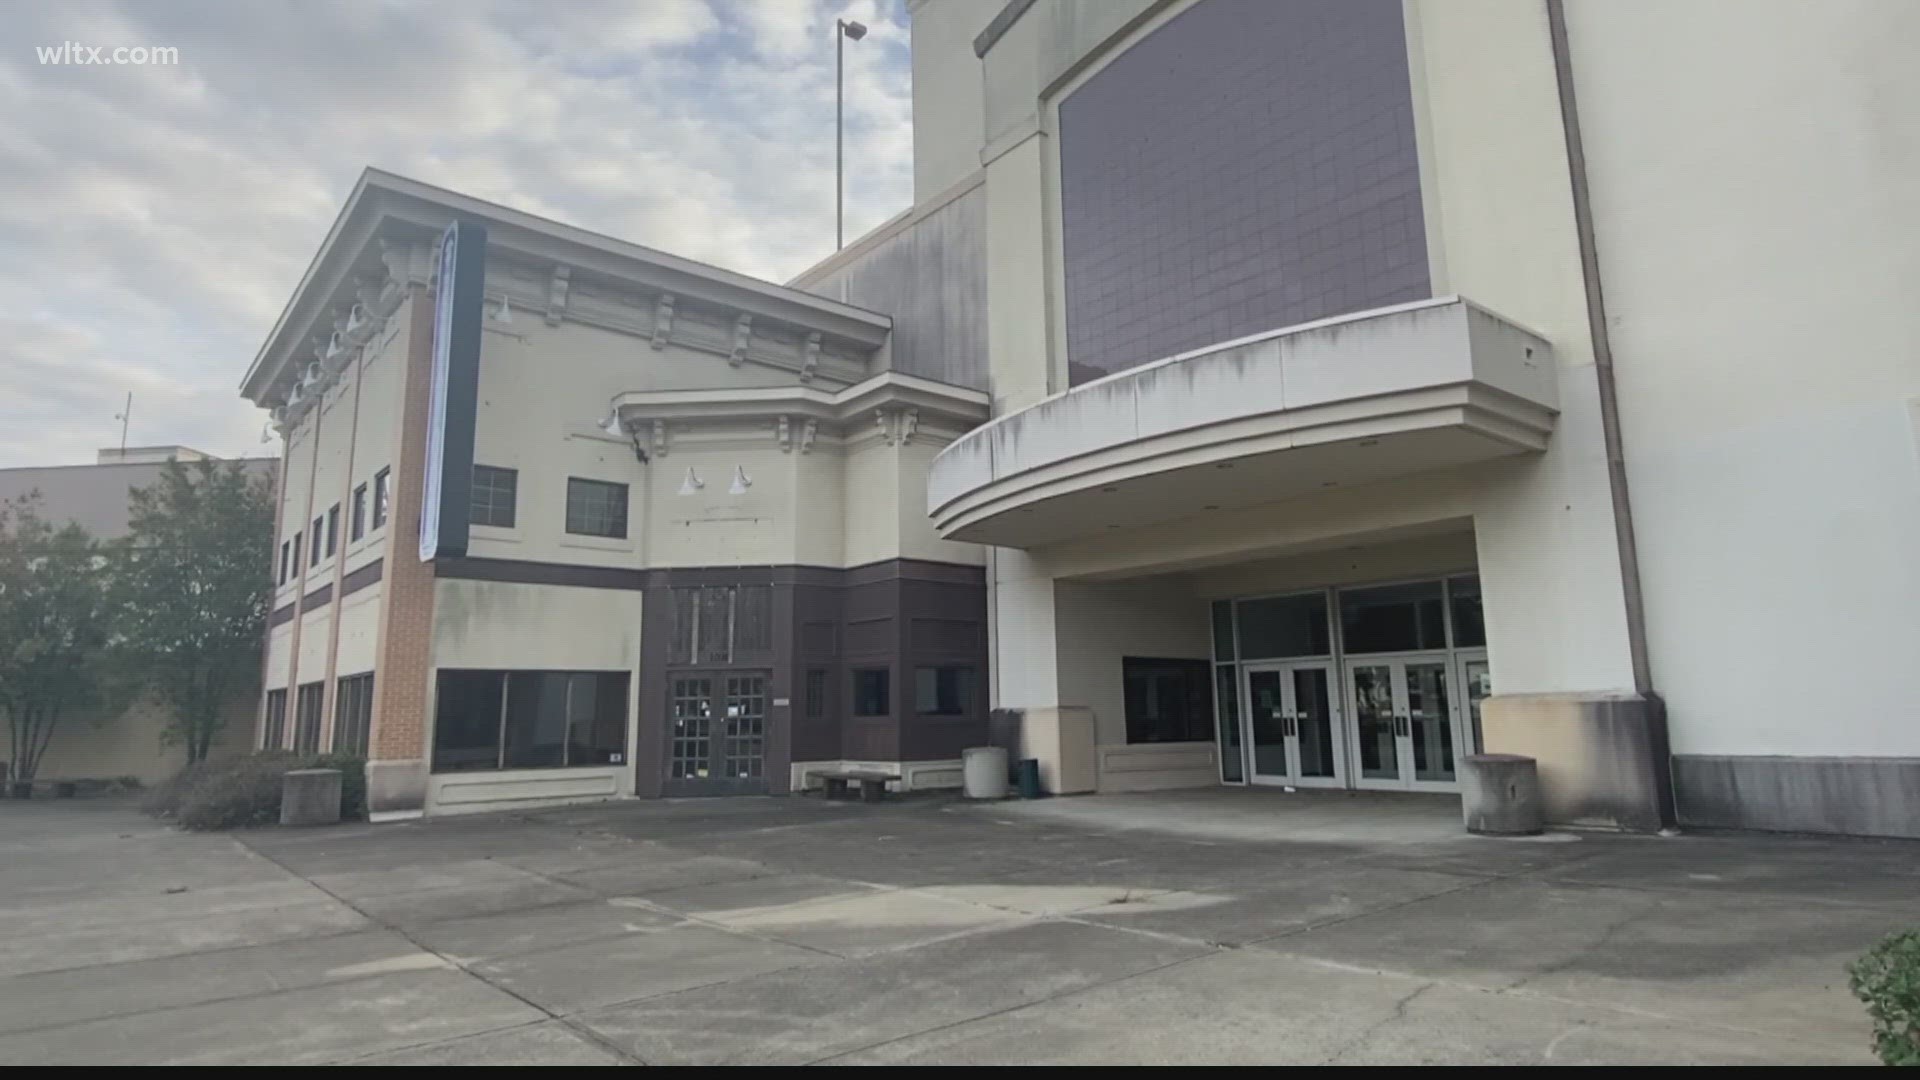 The demolition of the empty mall's exterior is set to begin Wednesday morning 3/19.